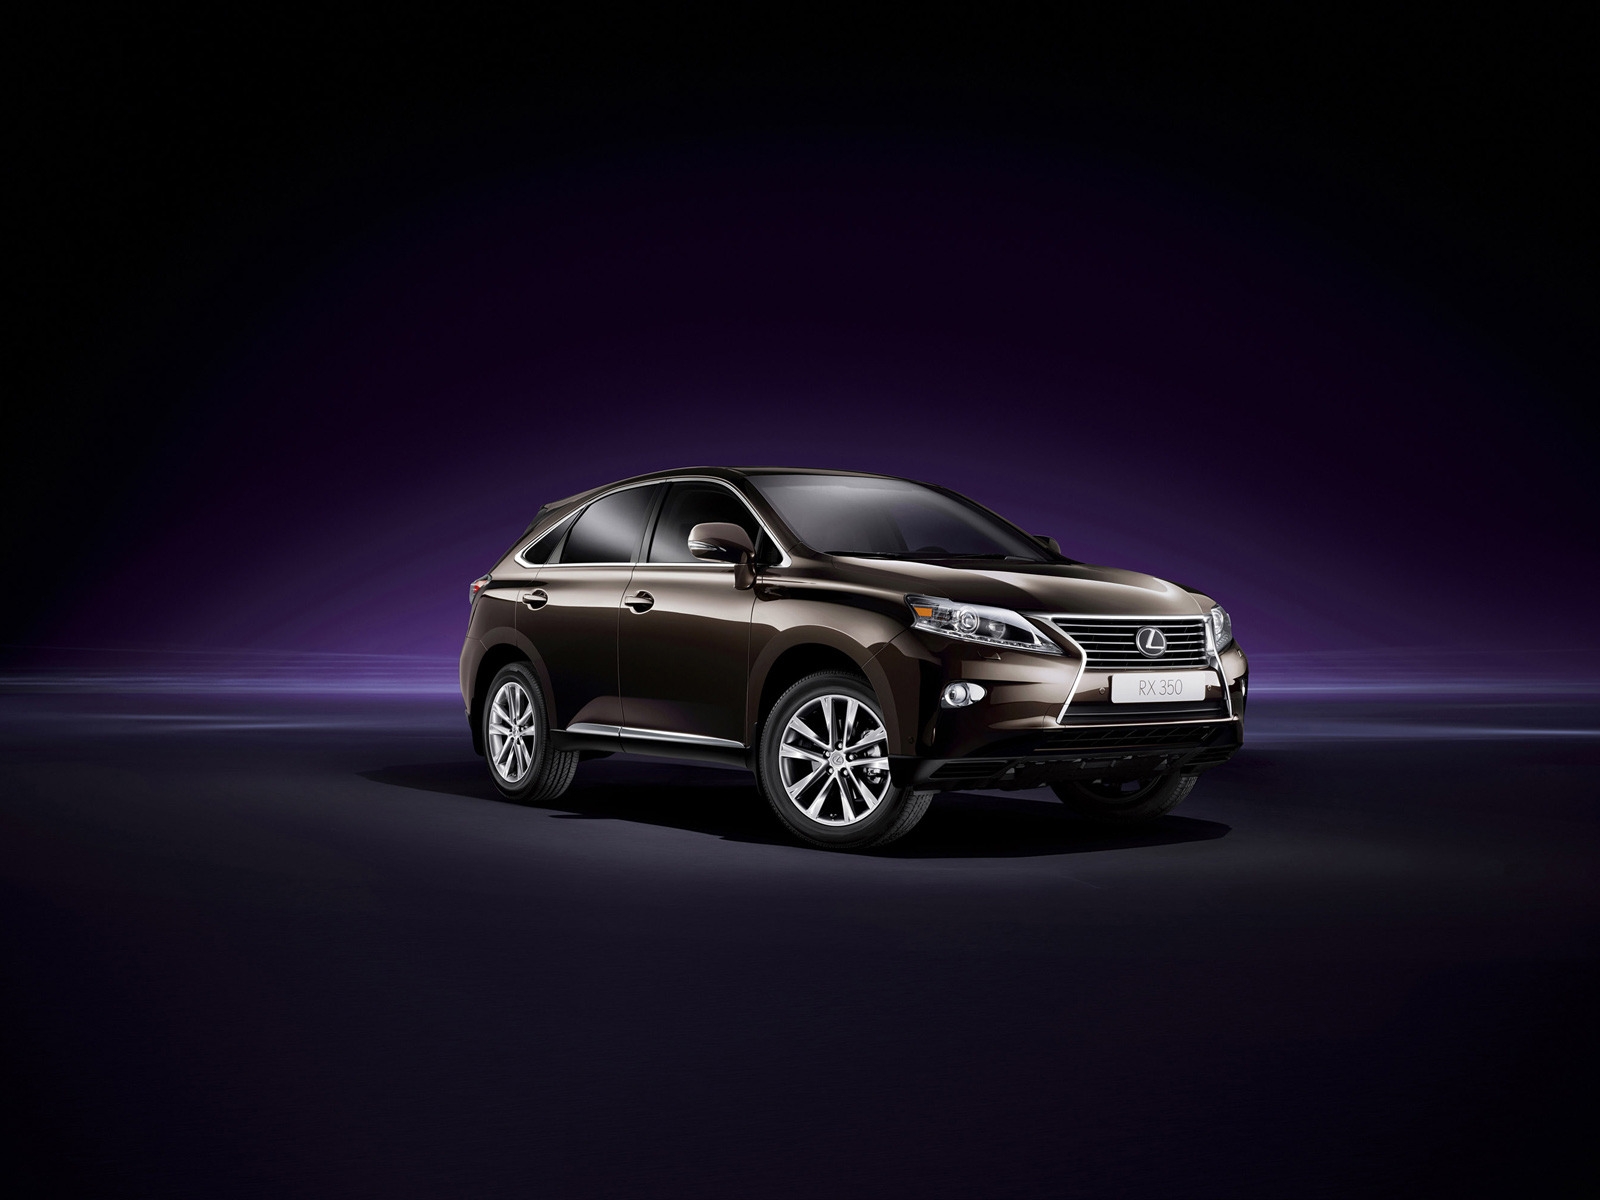 Lexus RX 350H 2013 for 1600 x 1200 resolution